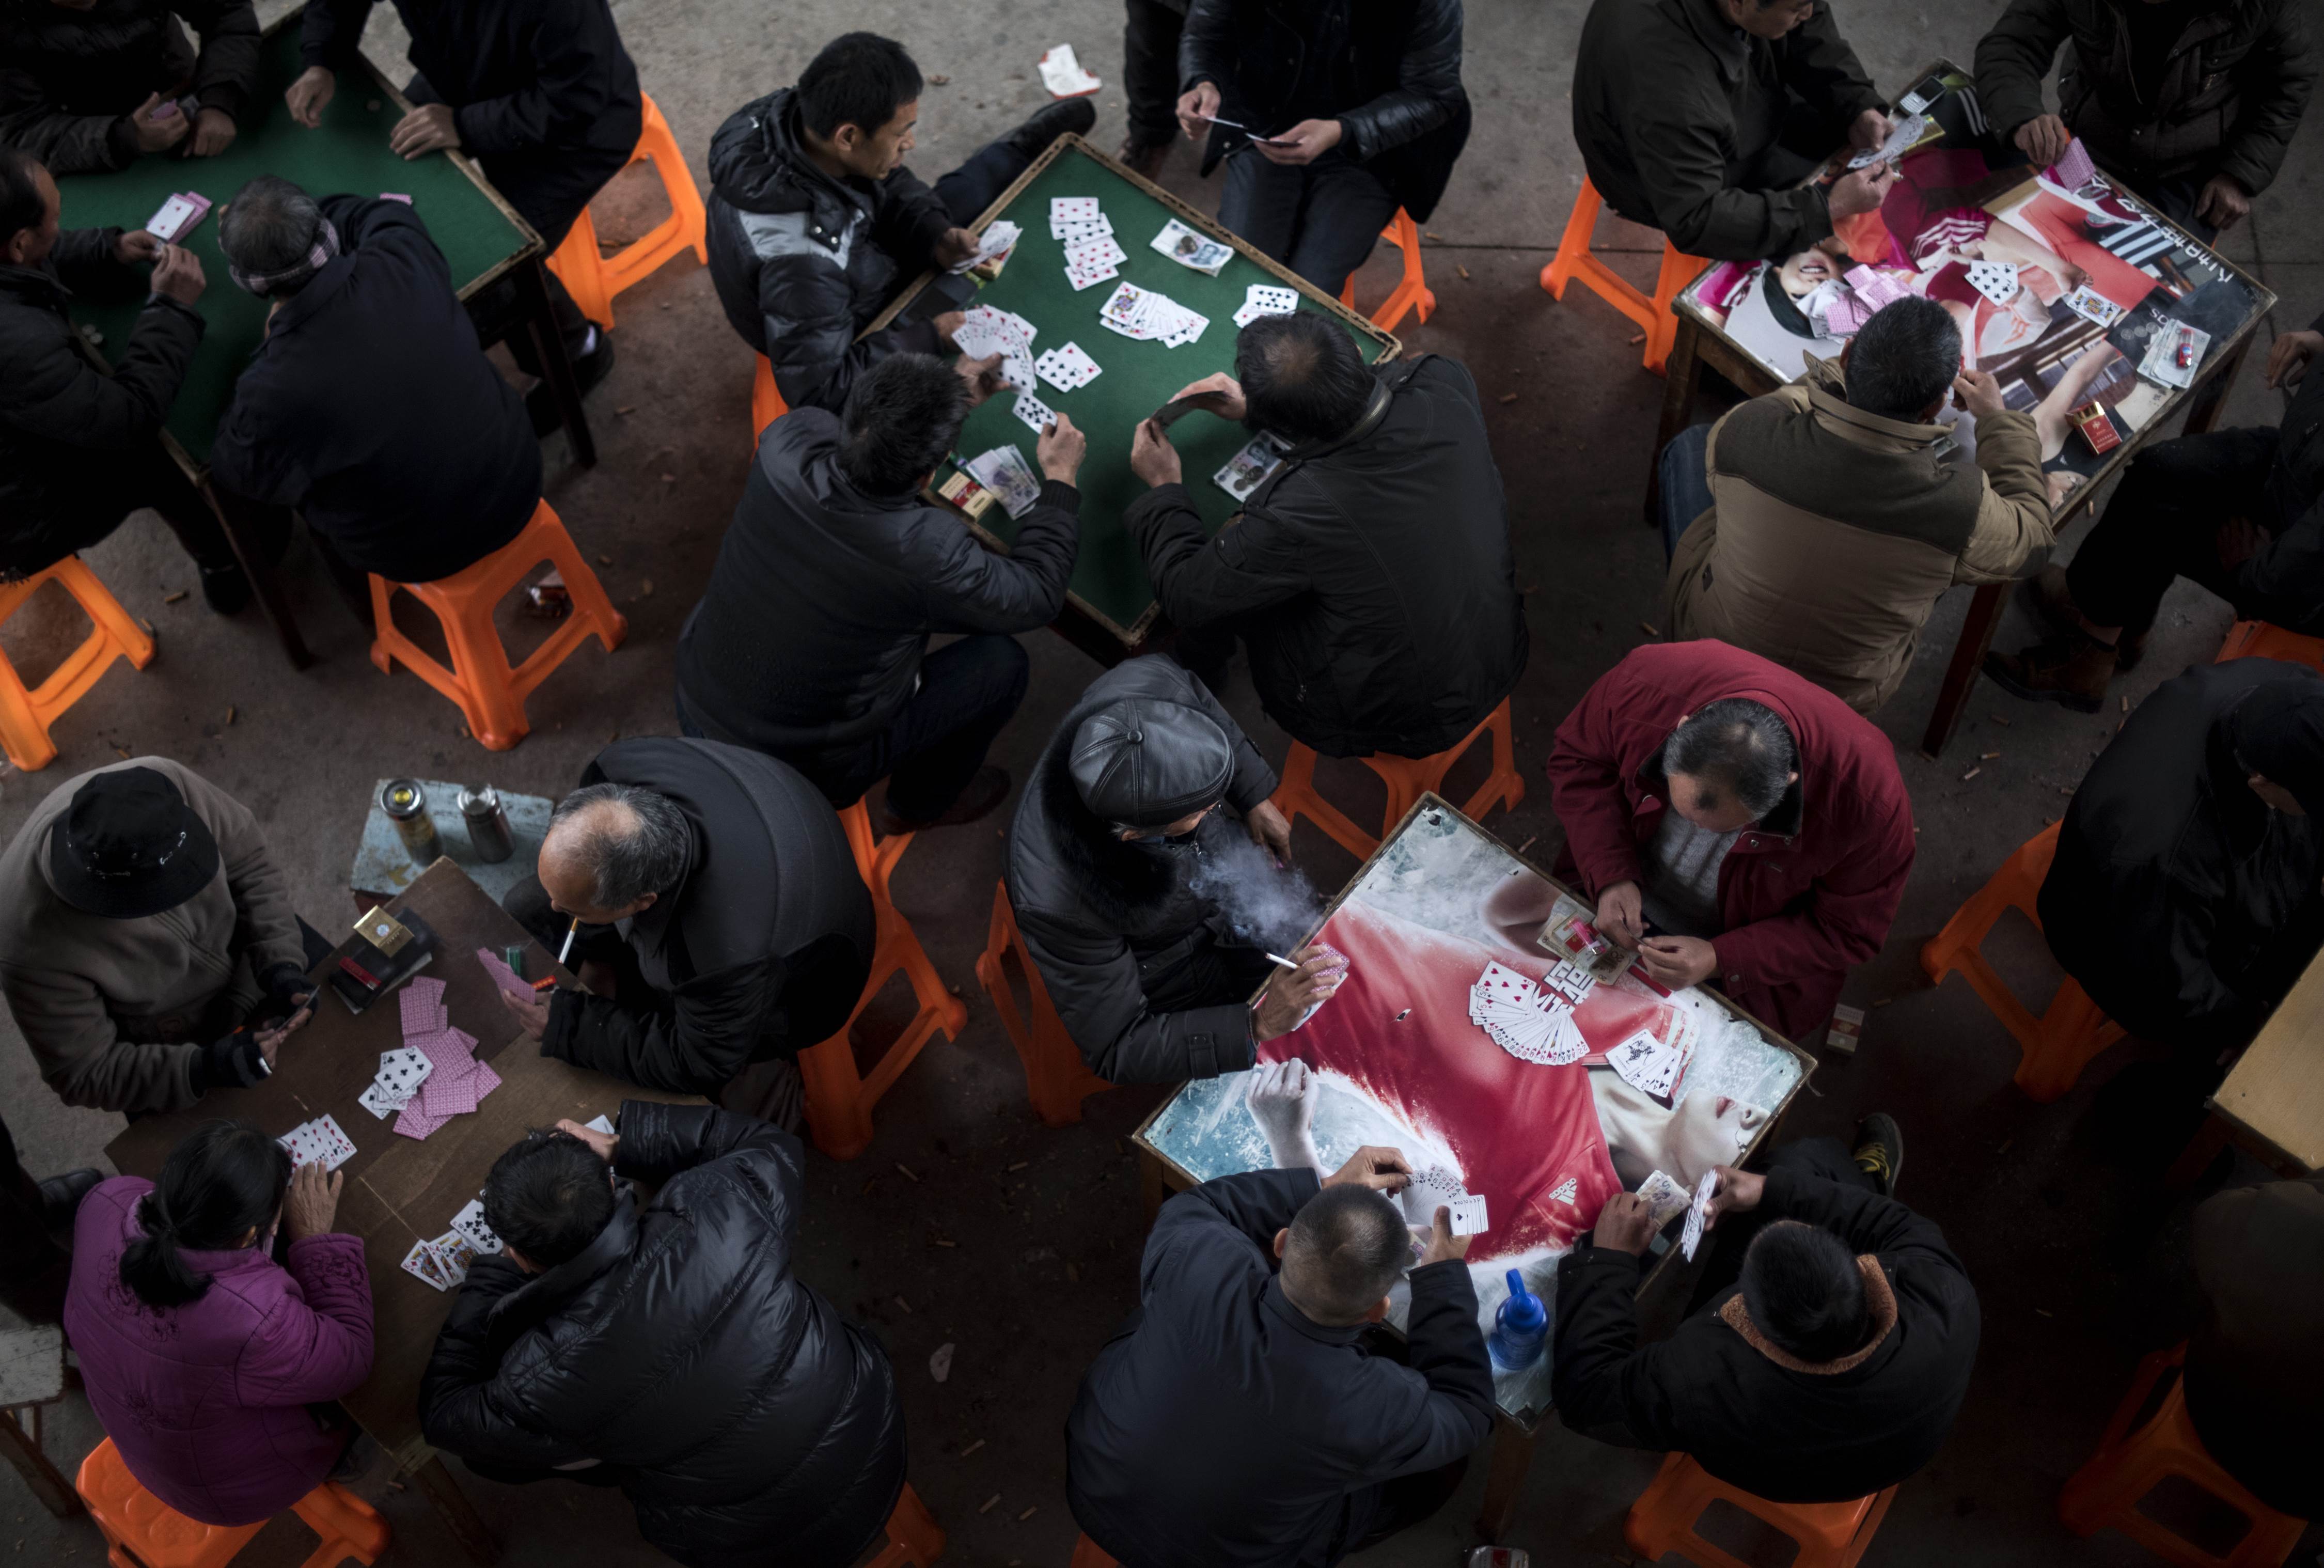 This picture taken on December 9, 2015 shows men playing cards under a bridge next to the Xin'an River on a rainy day in Huangshan city, southern Anhui province. China's consumer inflation rate edged up in November, official data showed on December 9, while factory gate price falls lingered at a six-year low as the world's second-largest economy grapples with slowing growth. AFP PHOTO / JOHANNES EISELE